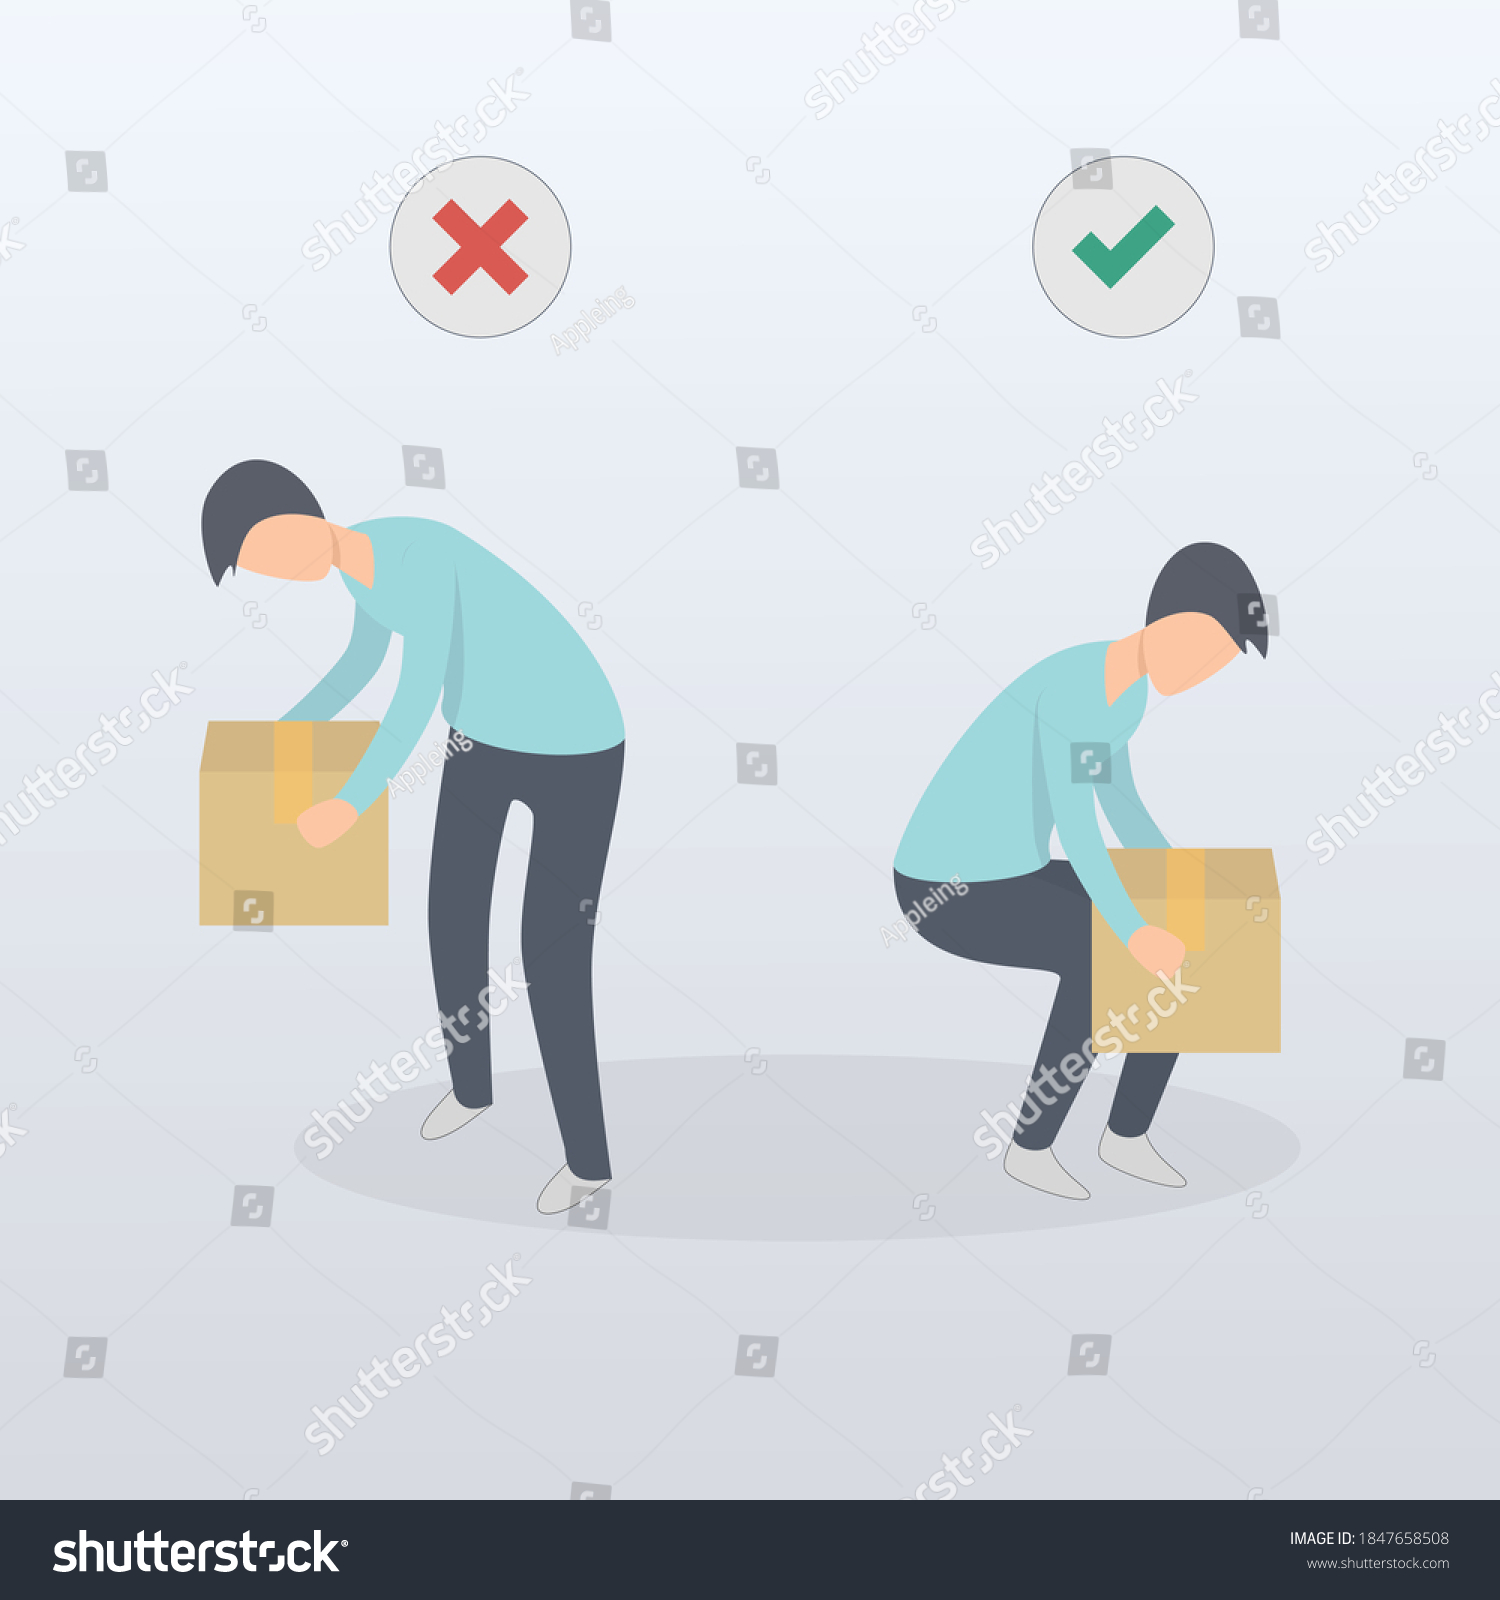 Correct Posture Lift Heavy Object Safely Stock Vector (Royalty Free ...